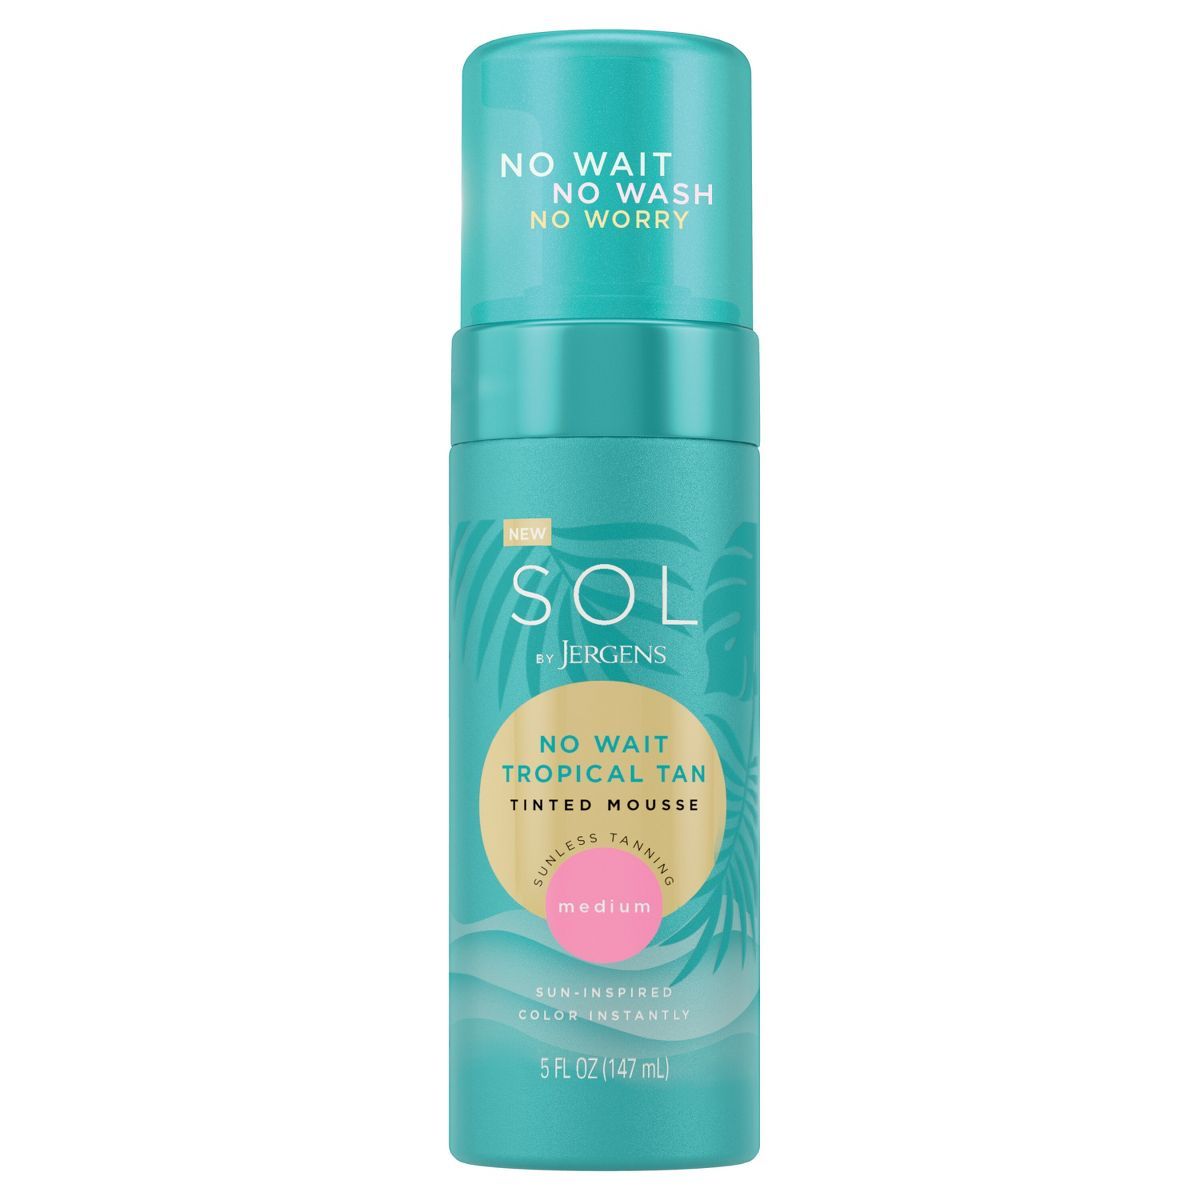 SOL by Jergens Tinted Sunless Tanning Mousse - 5 fl oz | Target